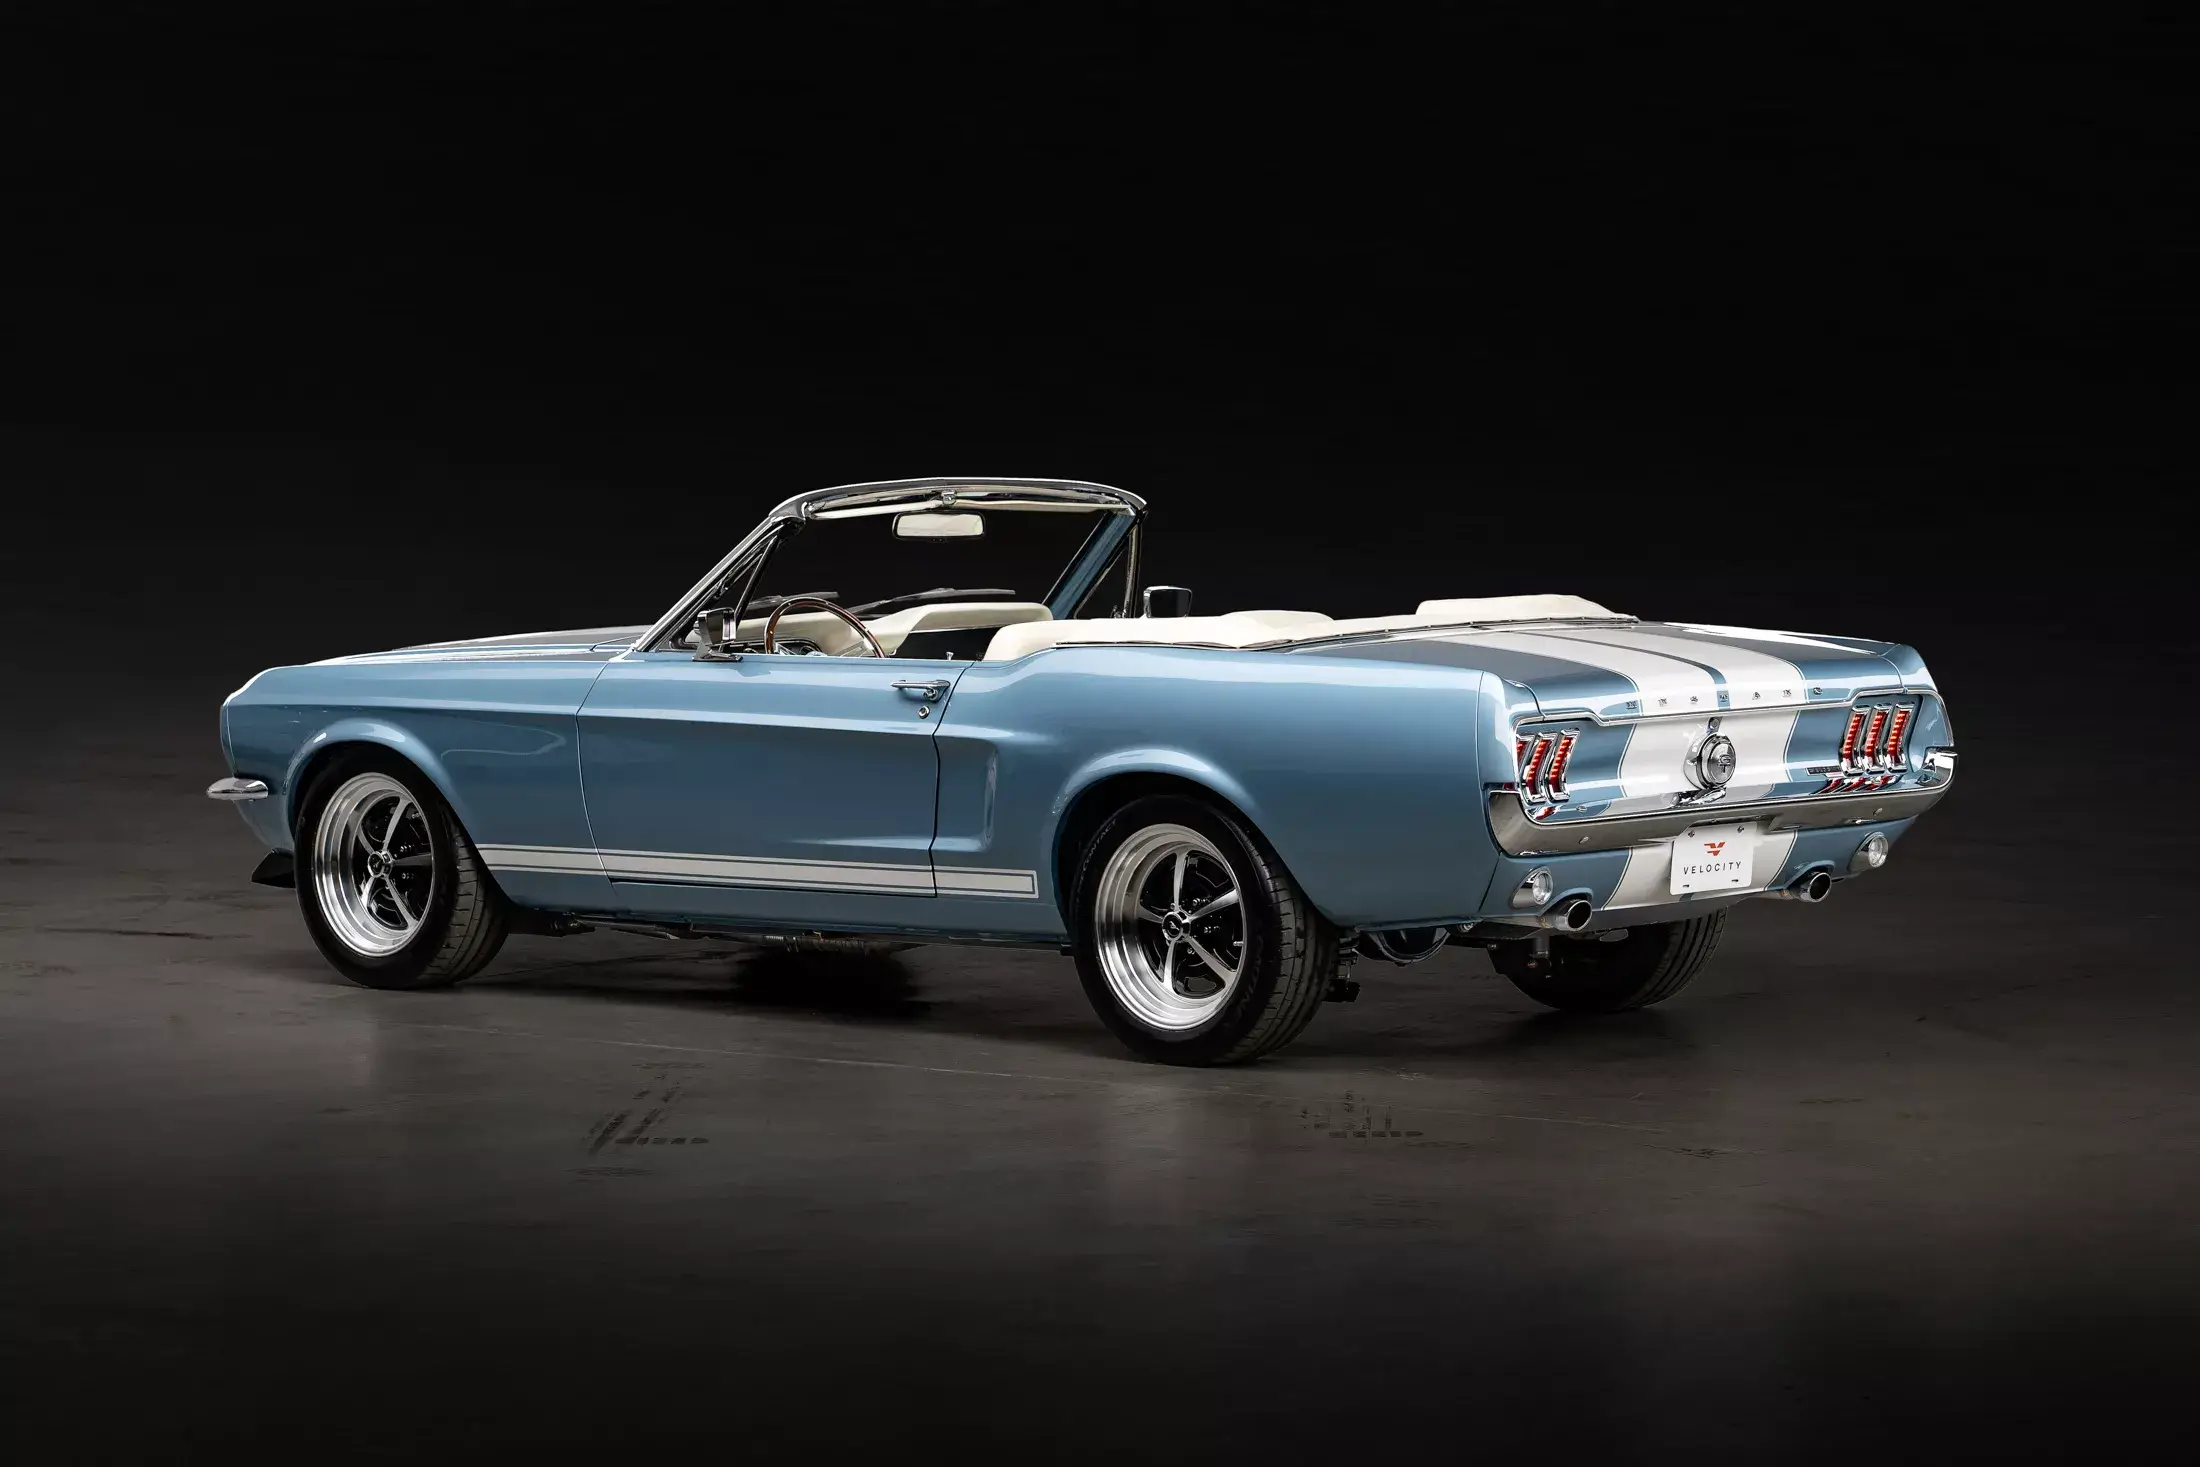 A classic Ford Mustang convertible has been transformed into an elegant sleeper restomod.